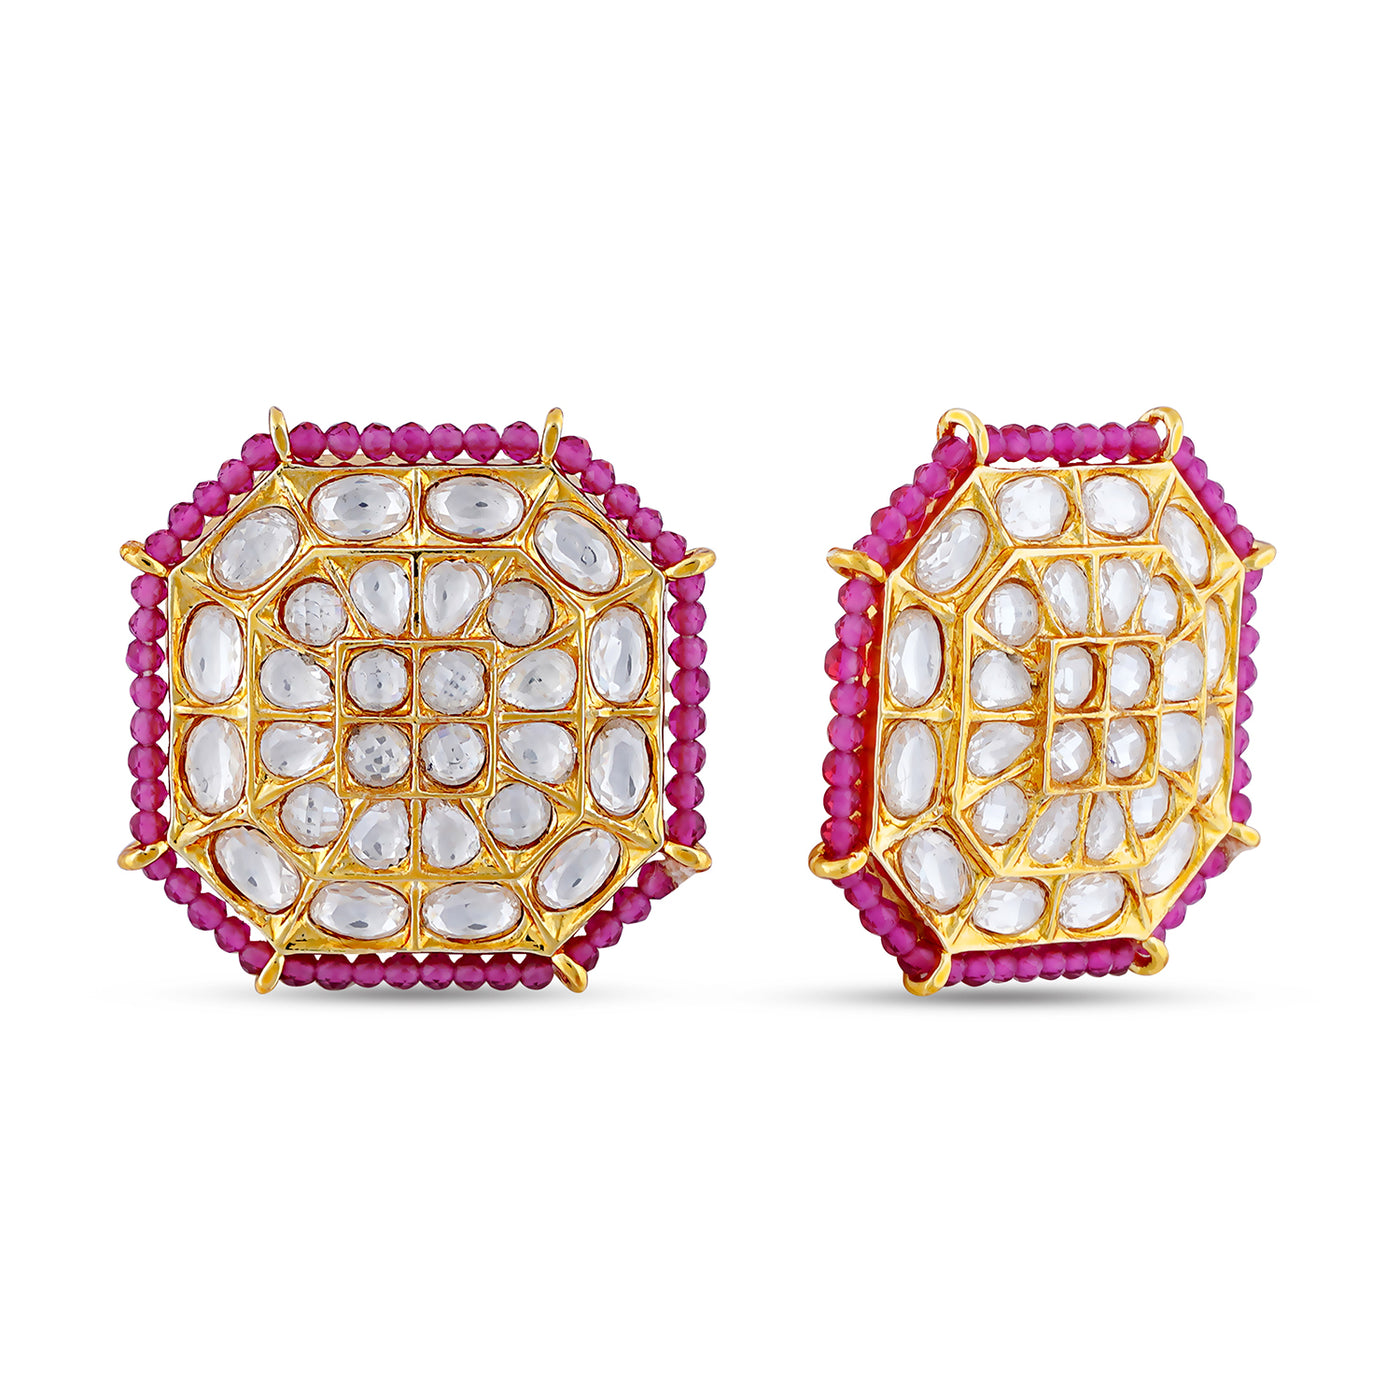 Kundan Pink bead Stud Earrings. Front View and Side View.